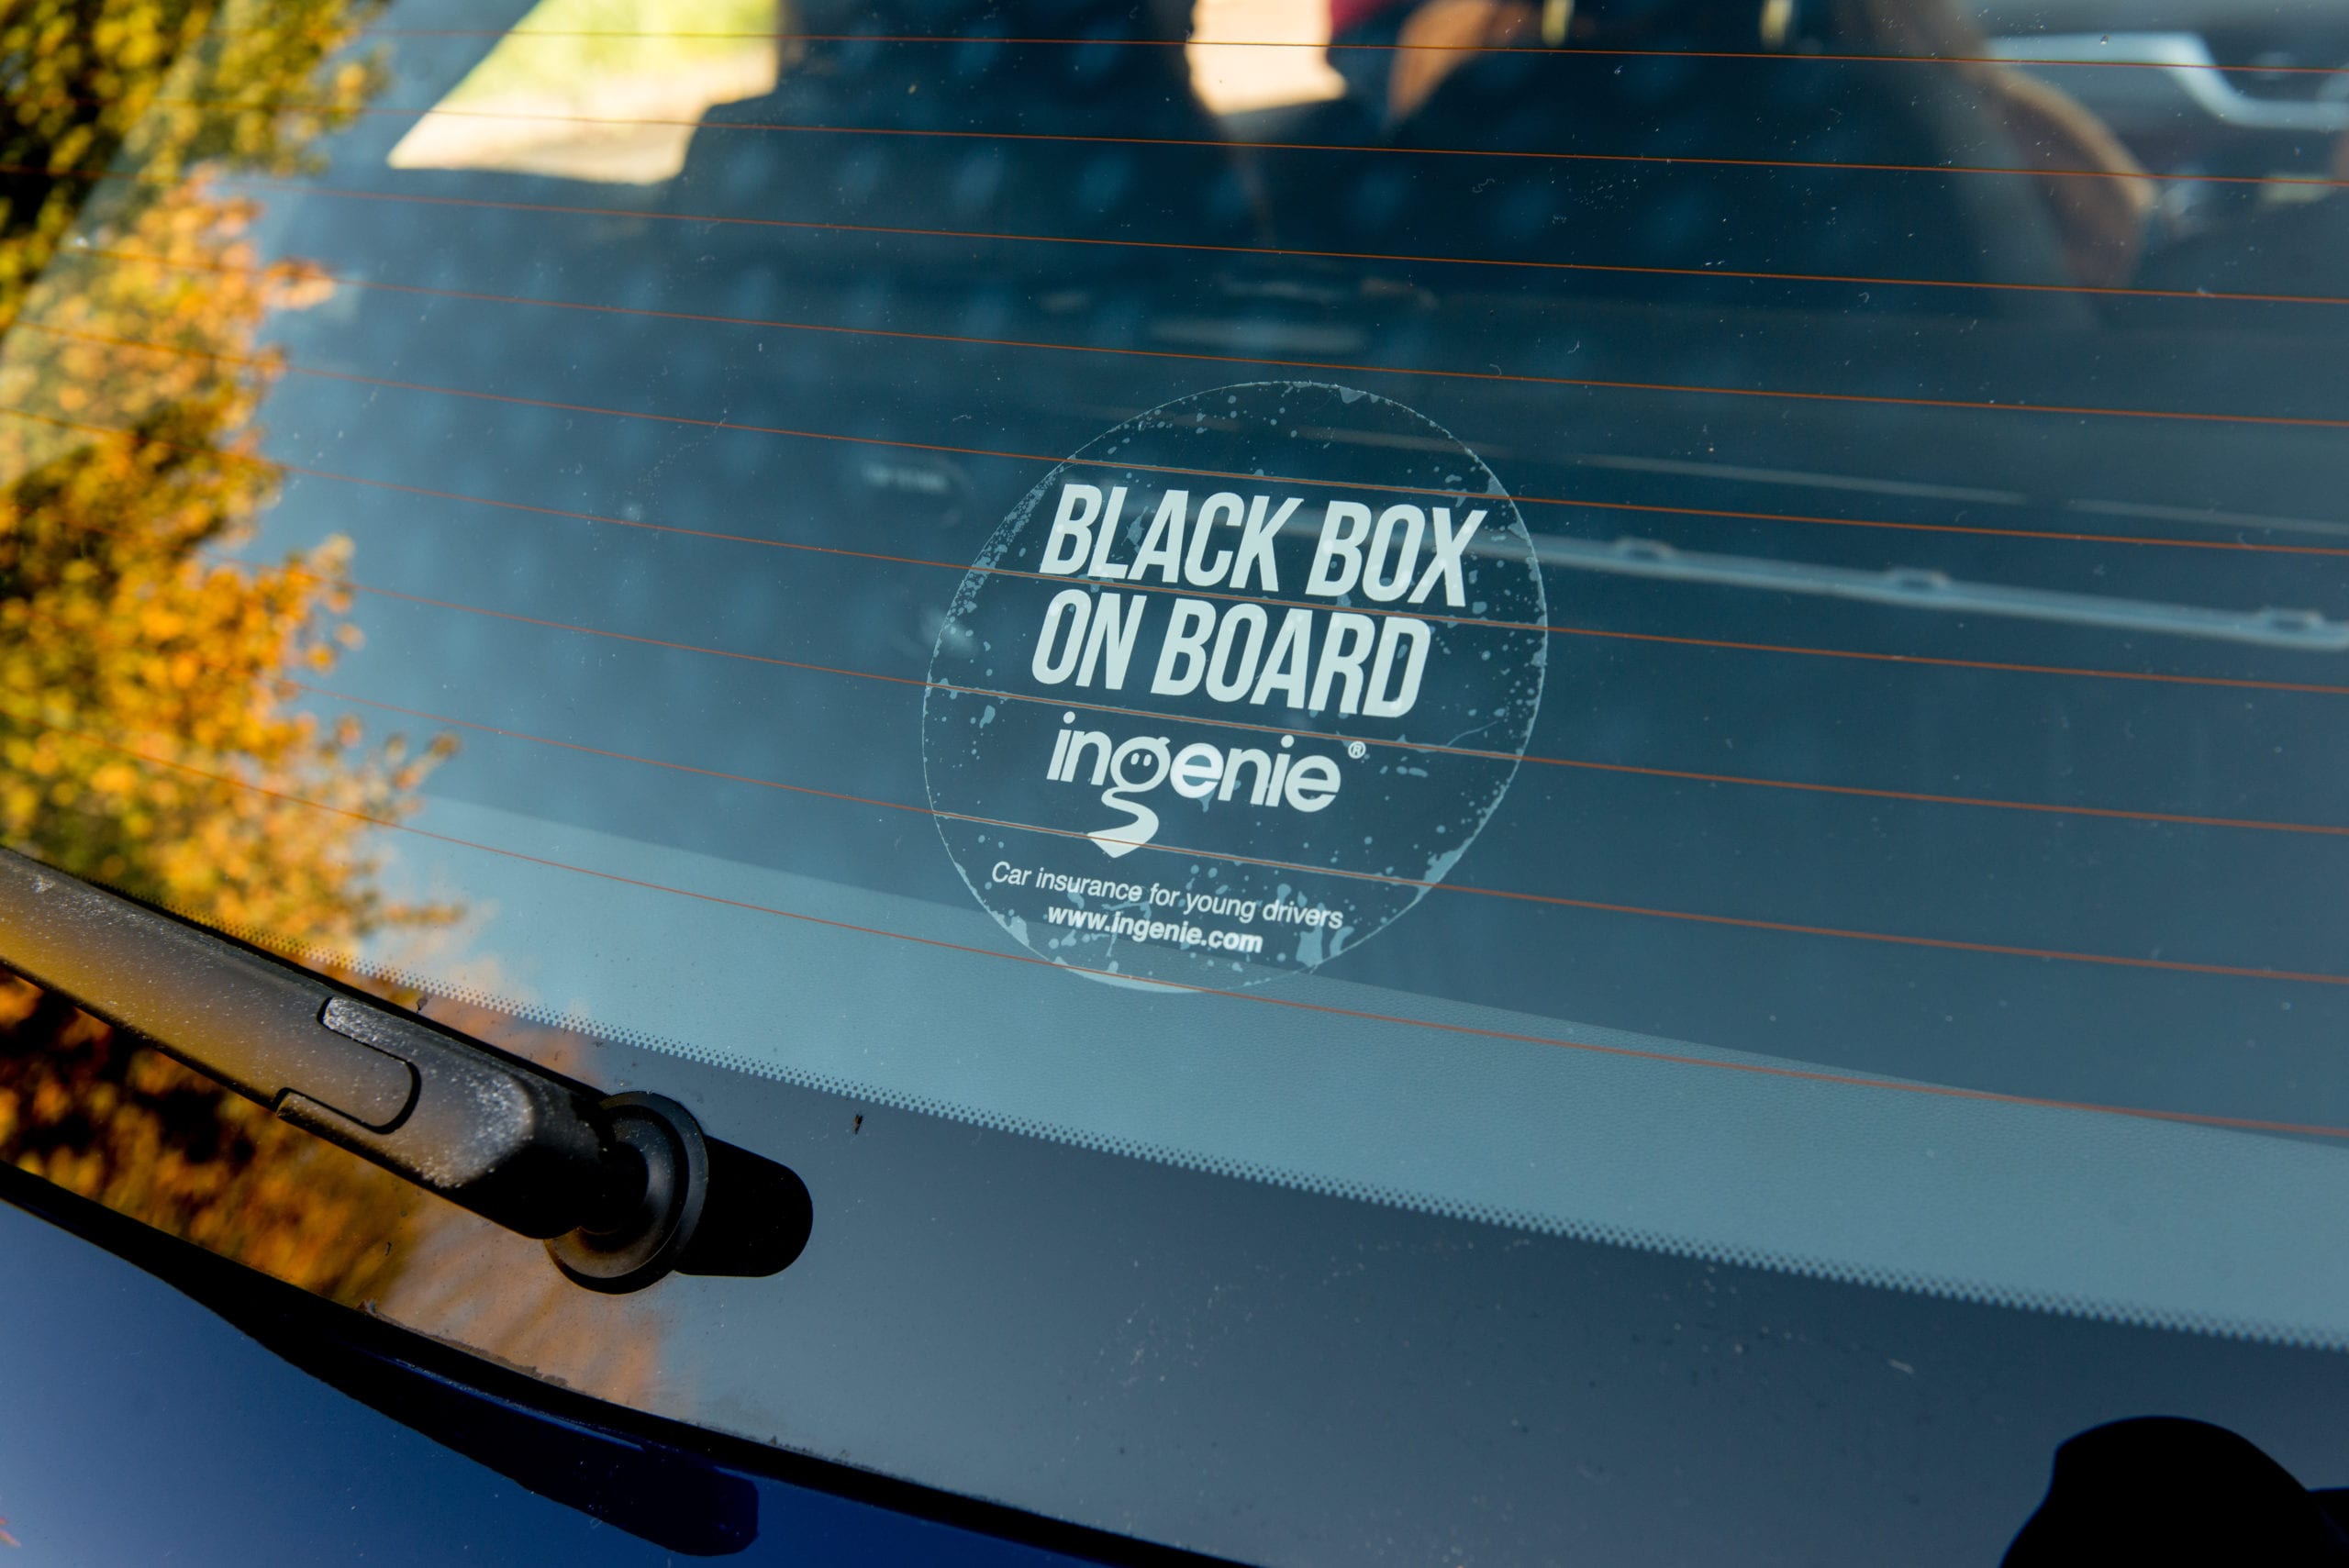 What is a black box in your car? Read on to know more